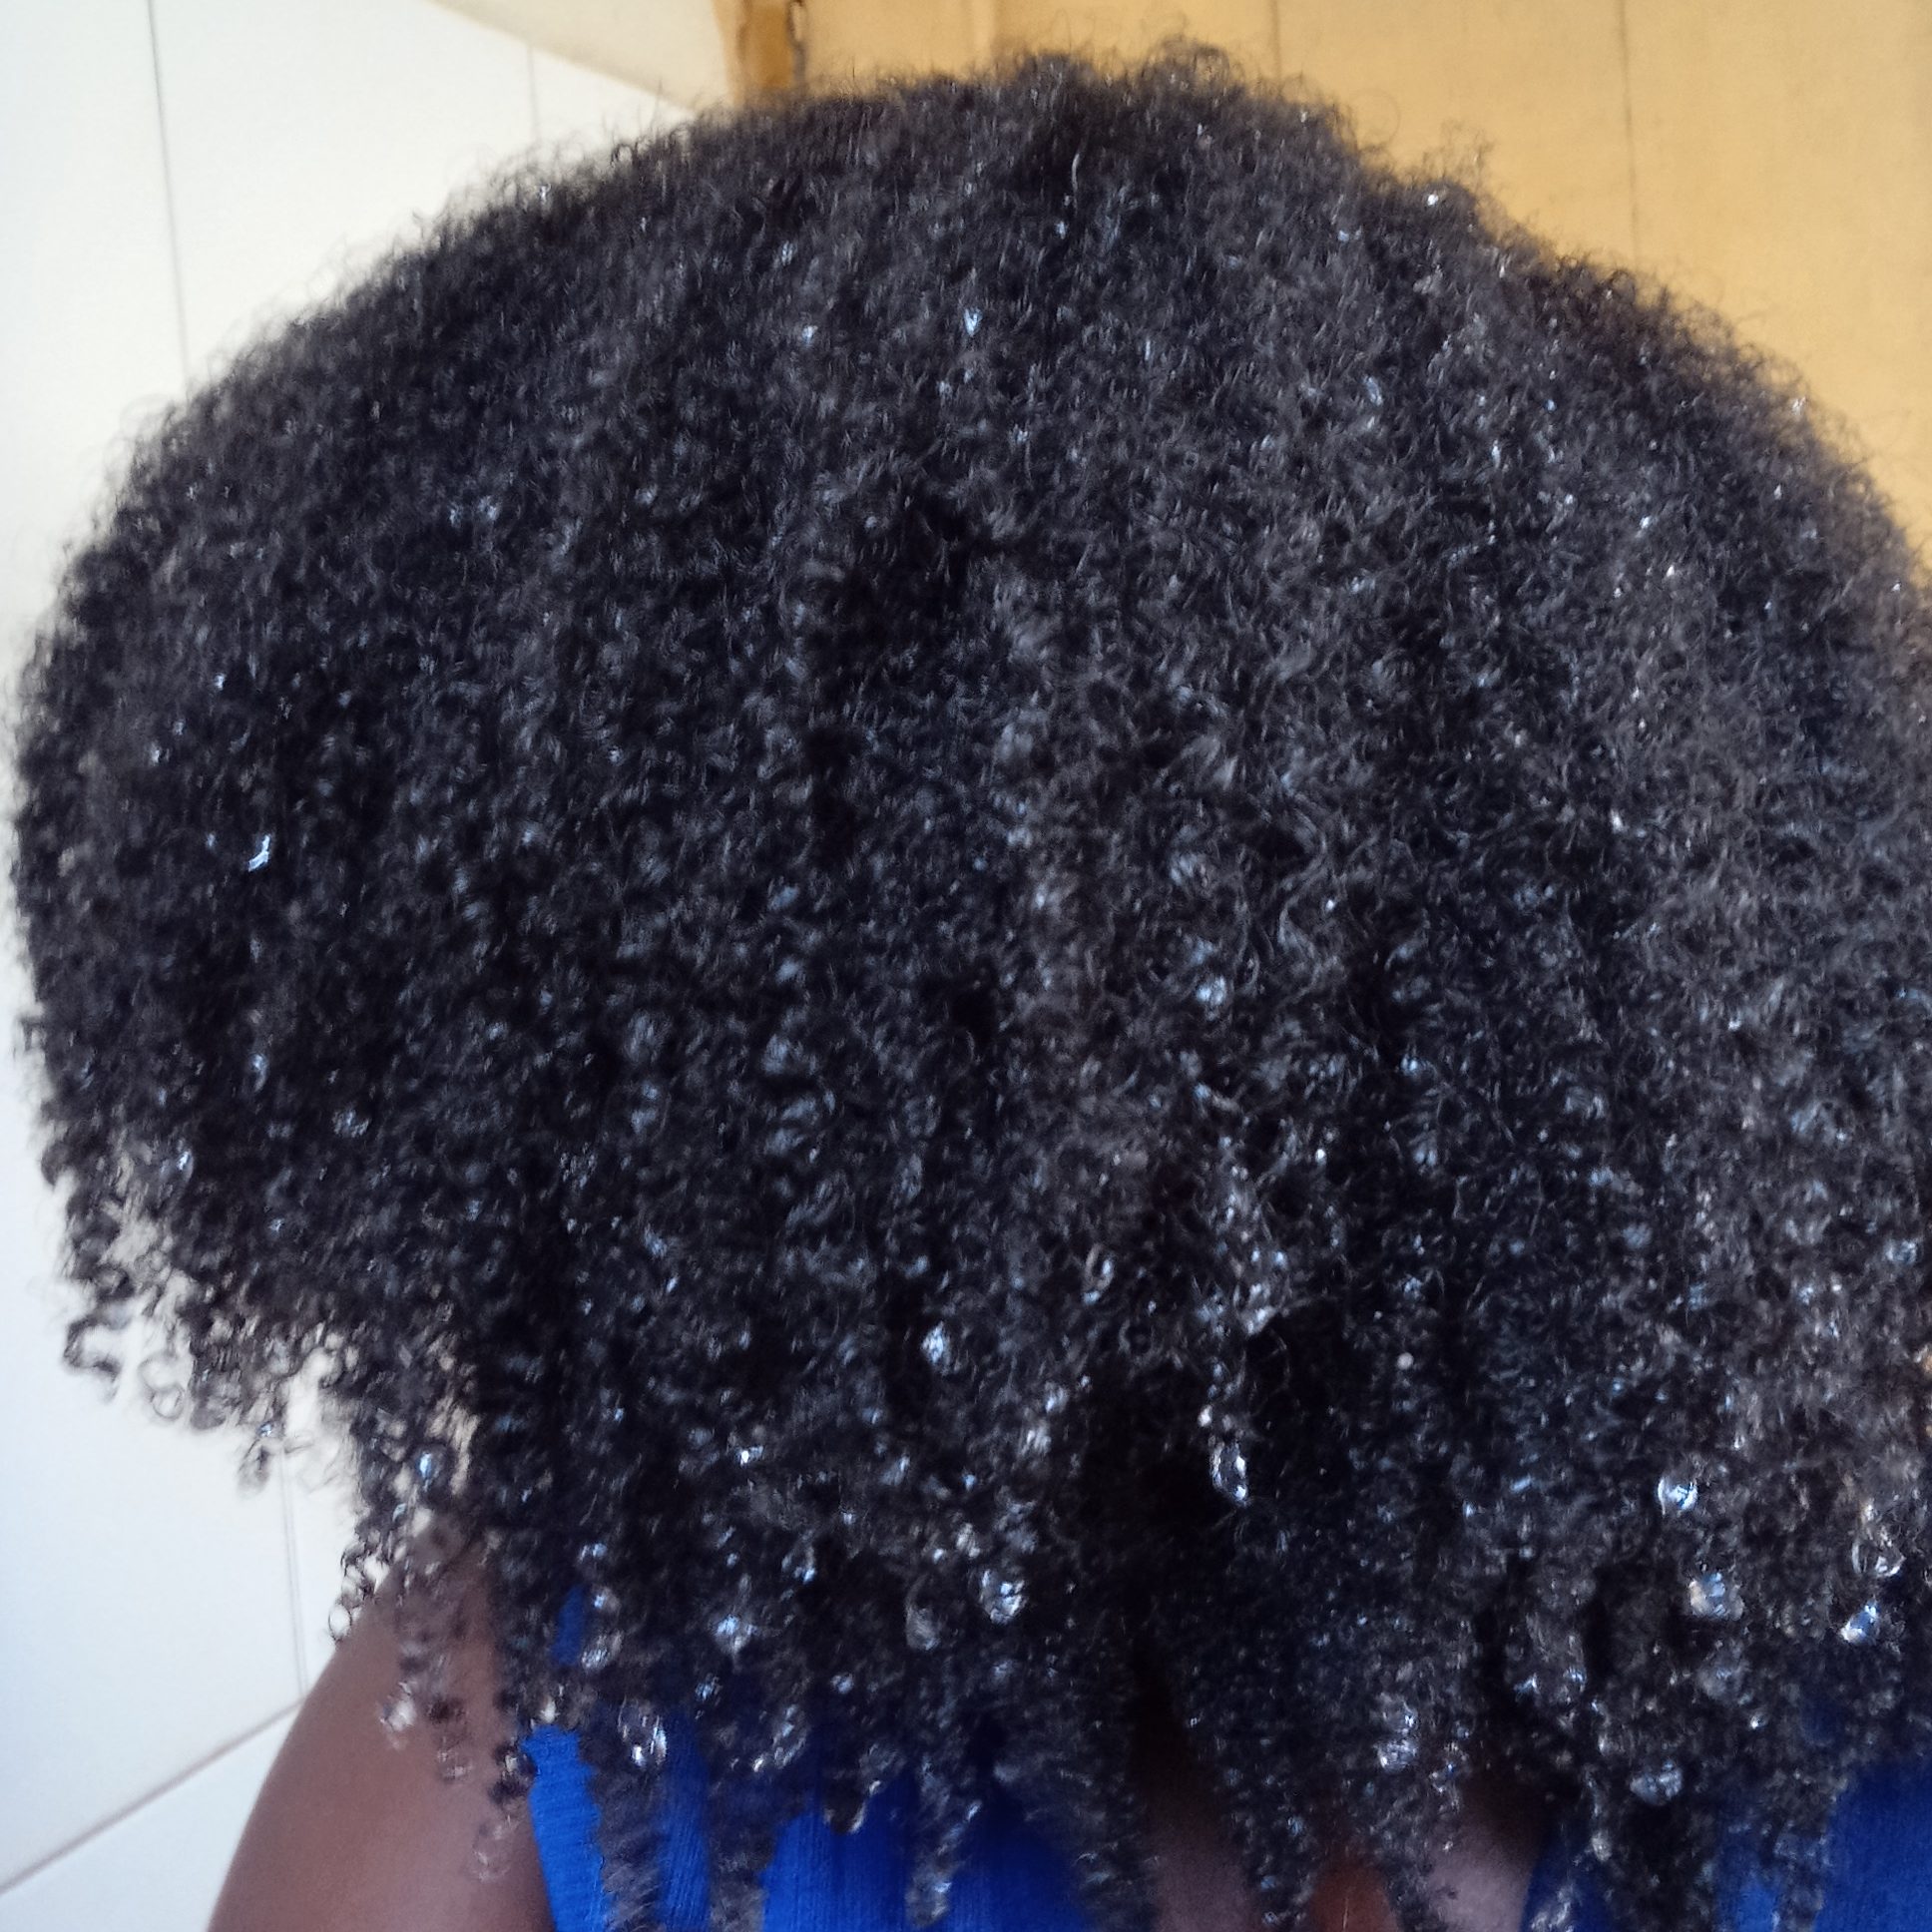 Rinsed natural hair on wash day